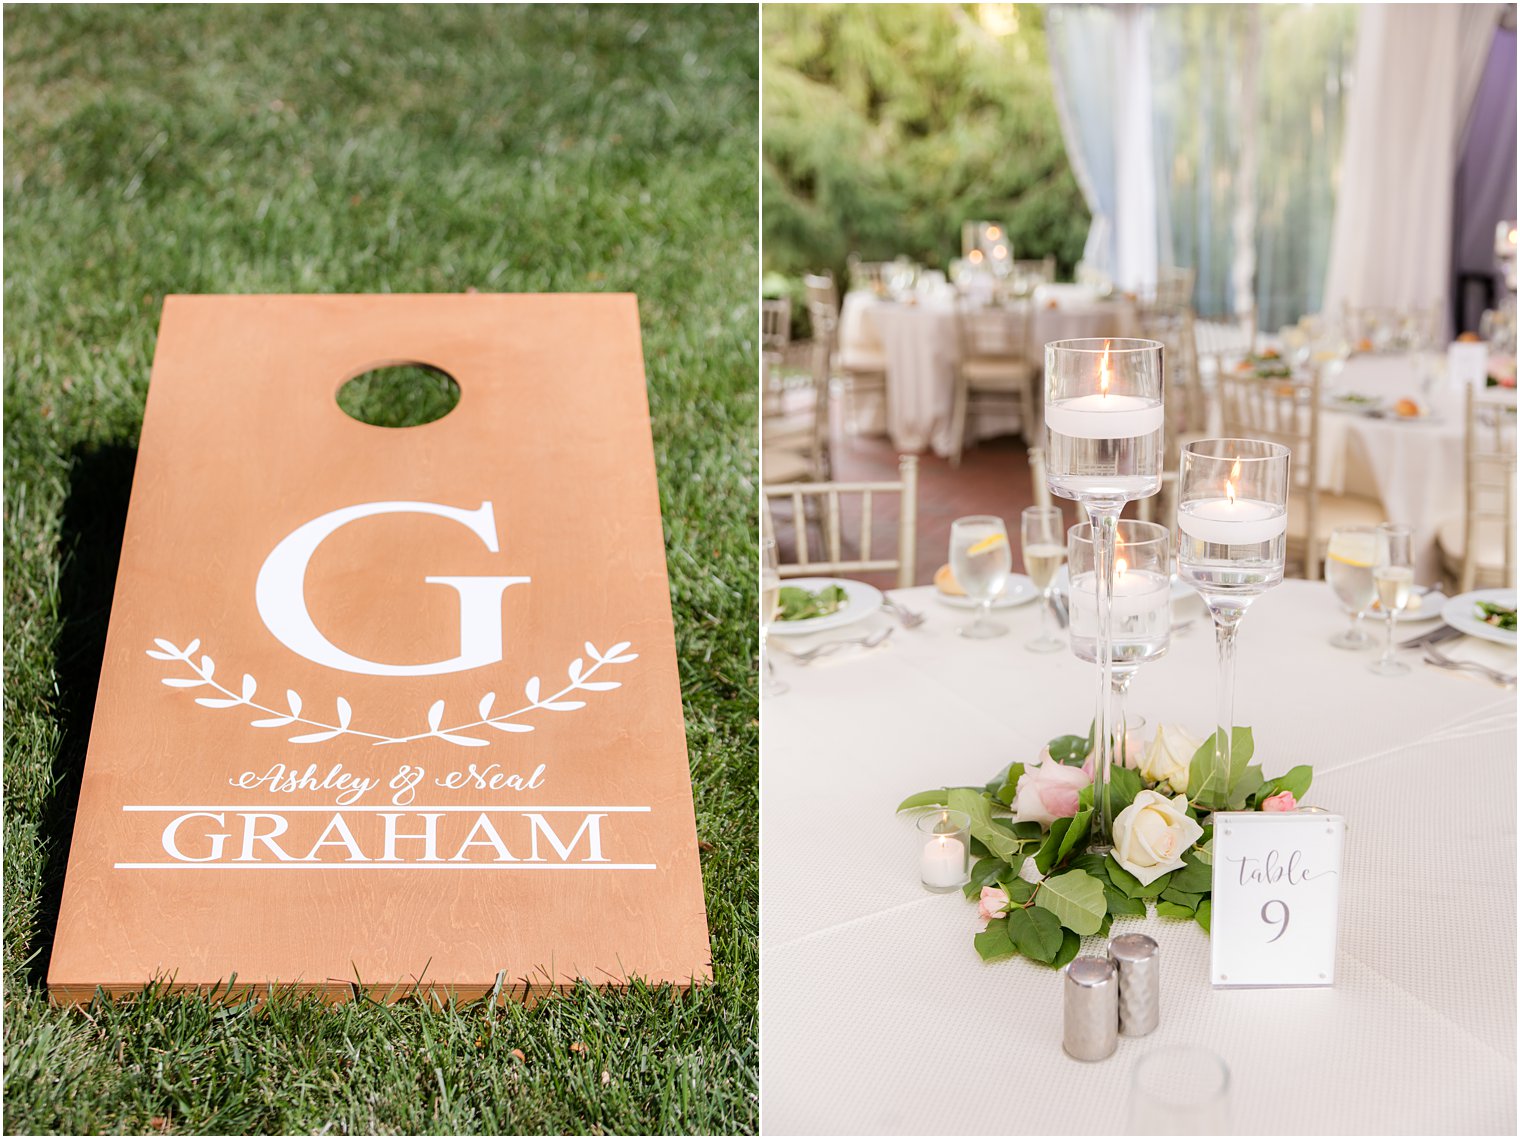 fall wedding reception details including corn hole board and floating candle centerpieces 